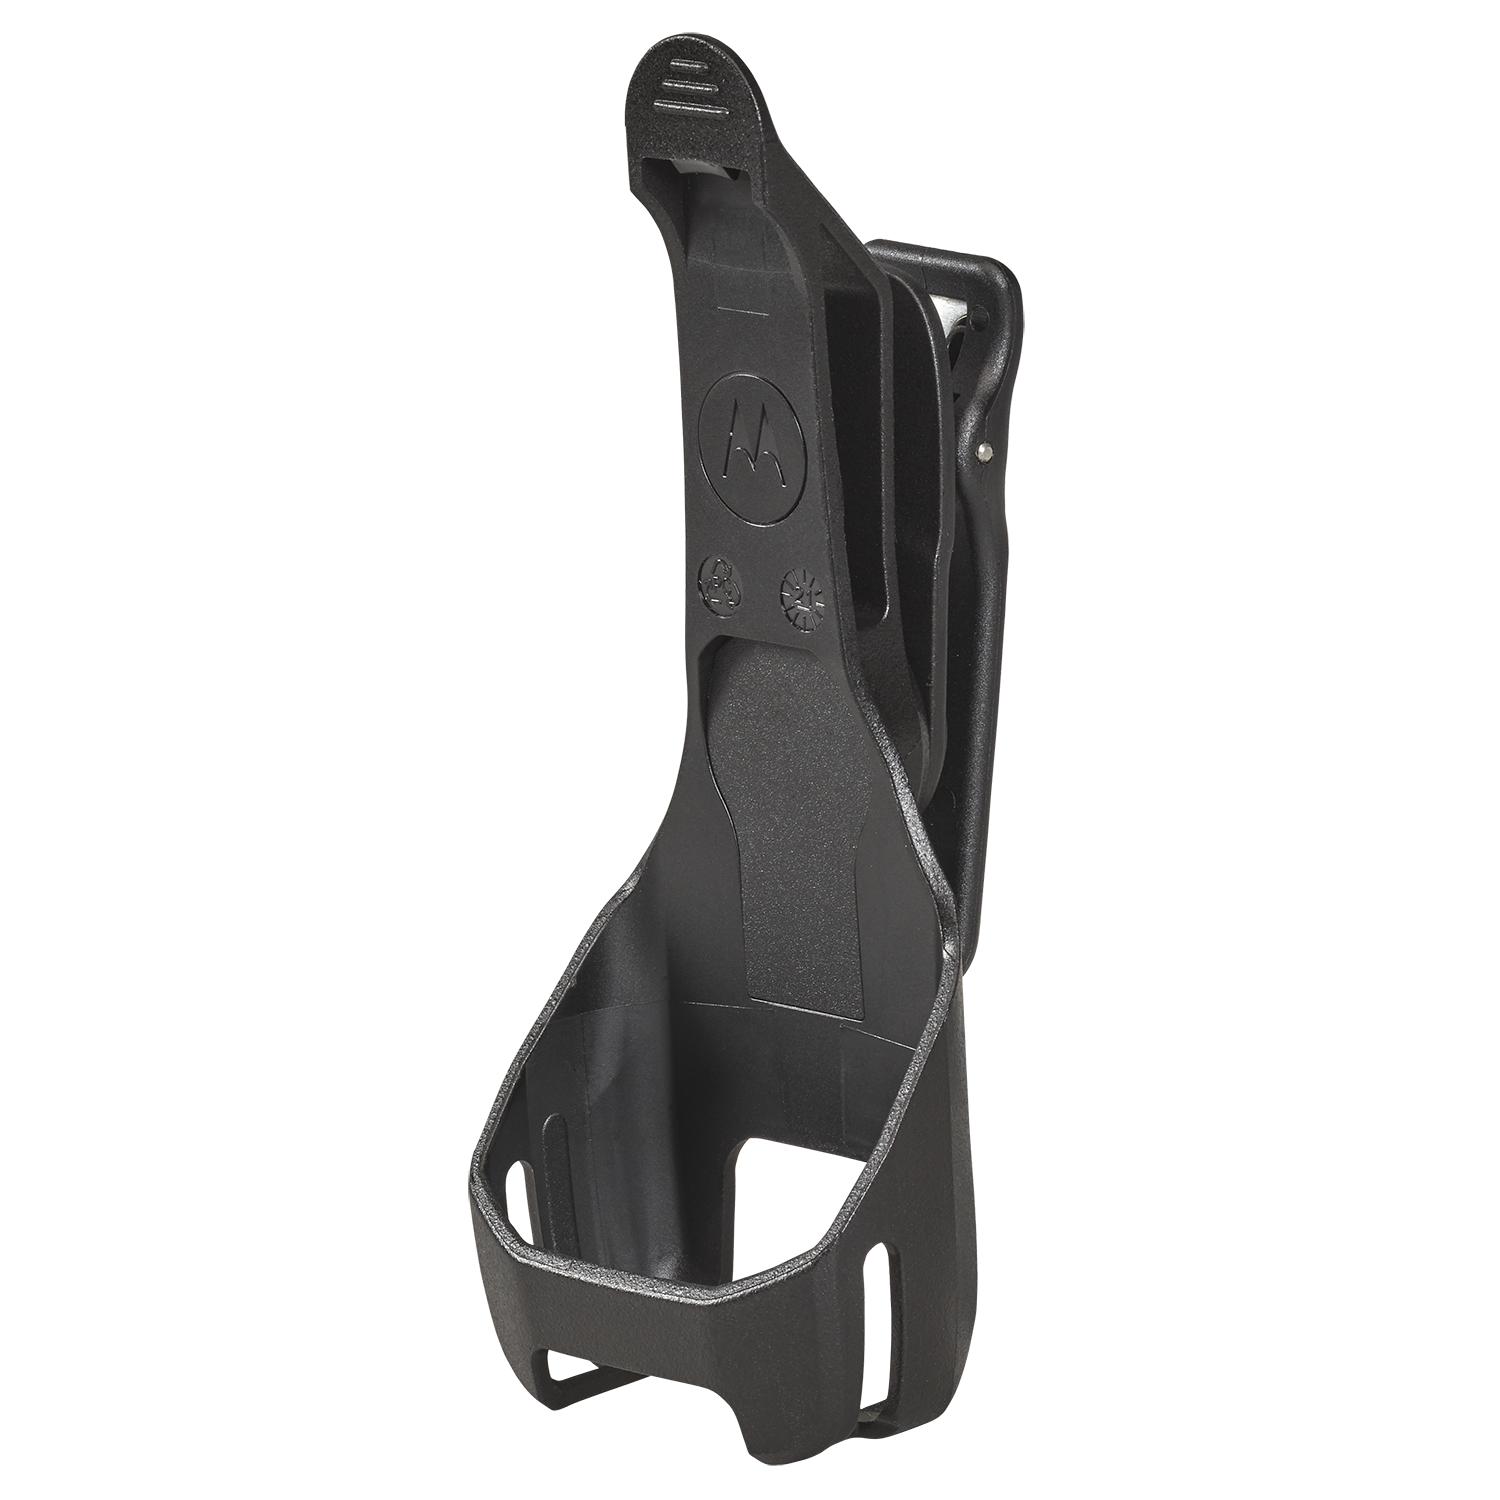 Curve holster